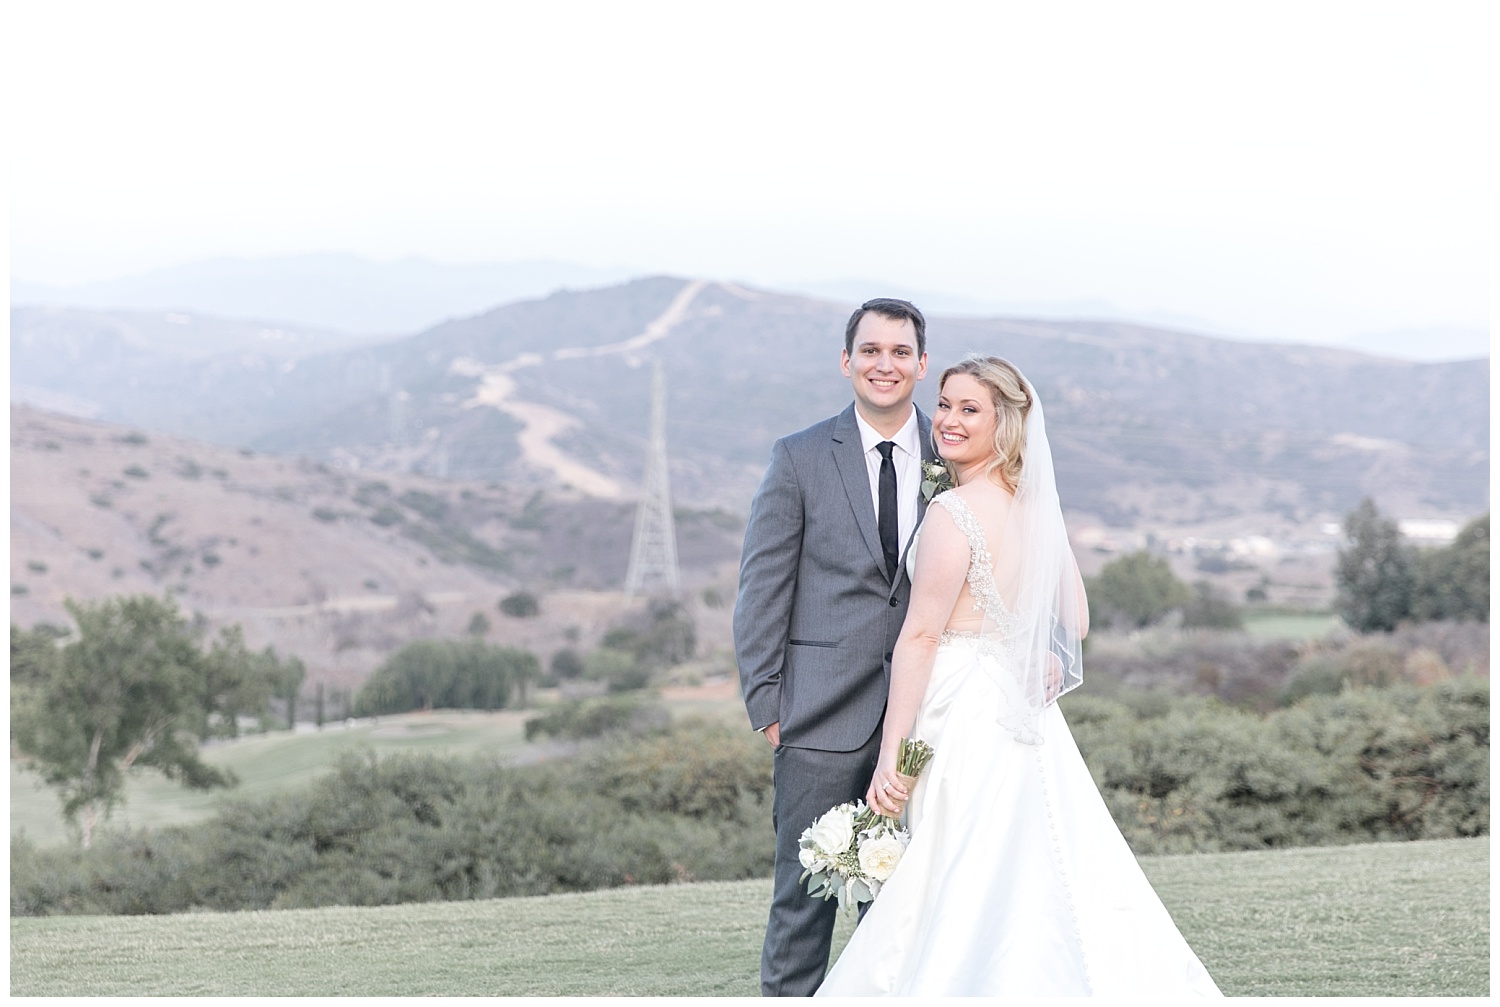 catherine + tim - bella collina golf course - san clemente california - wedding party - bride and groom couples portraits-0247